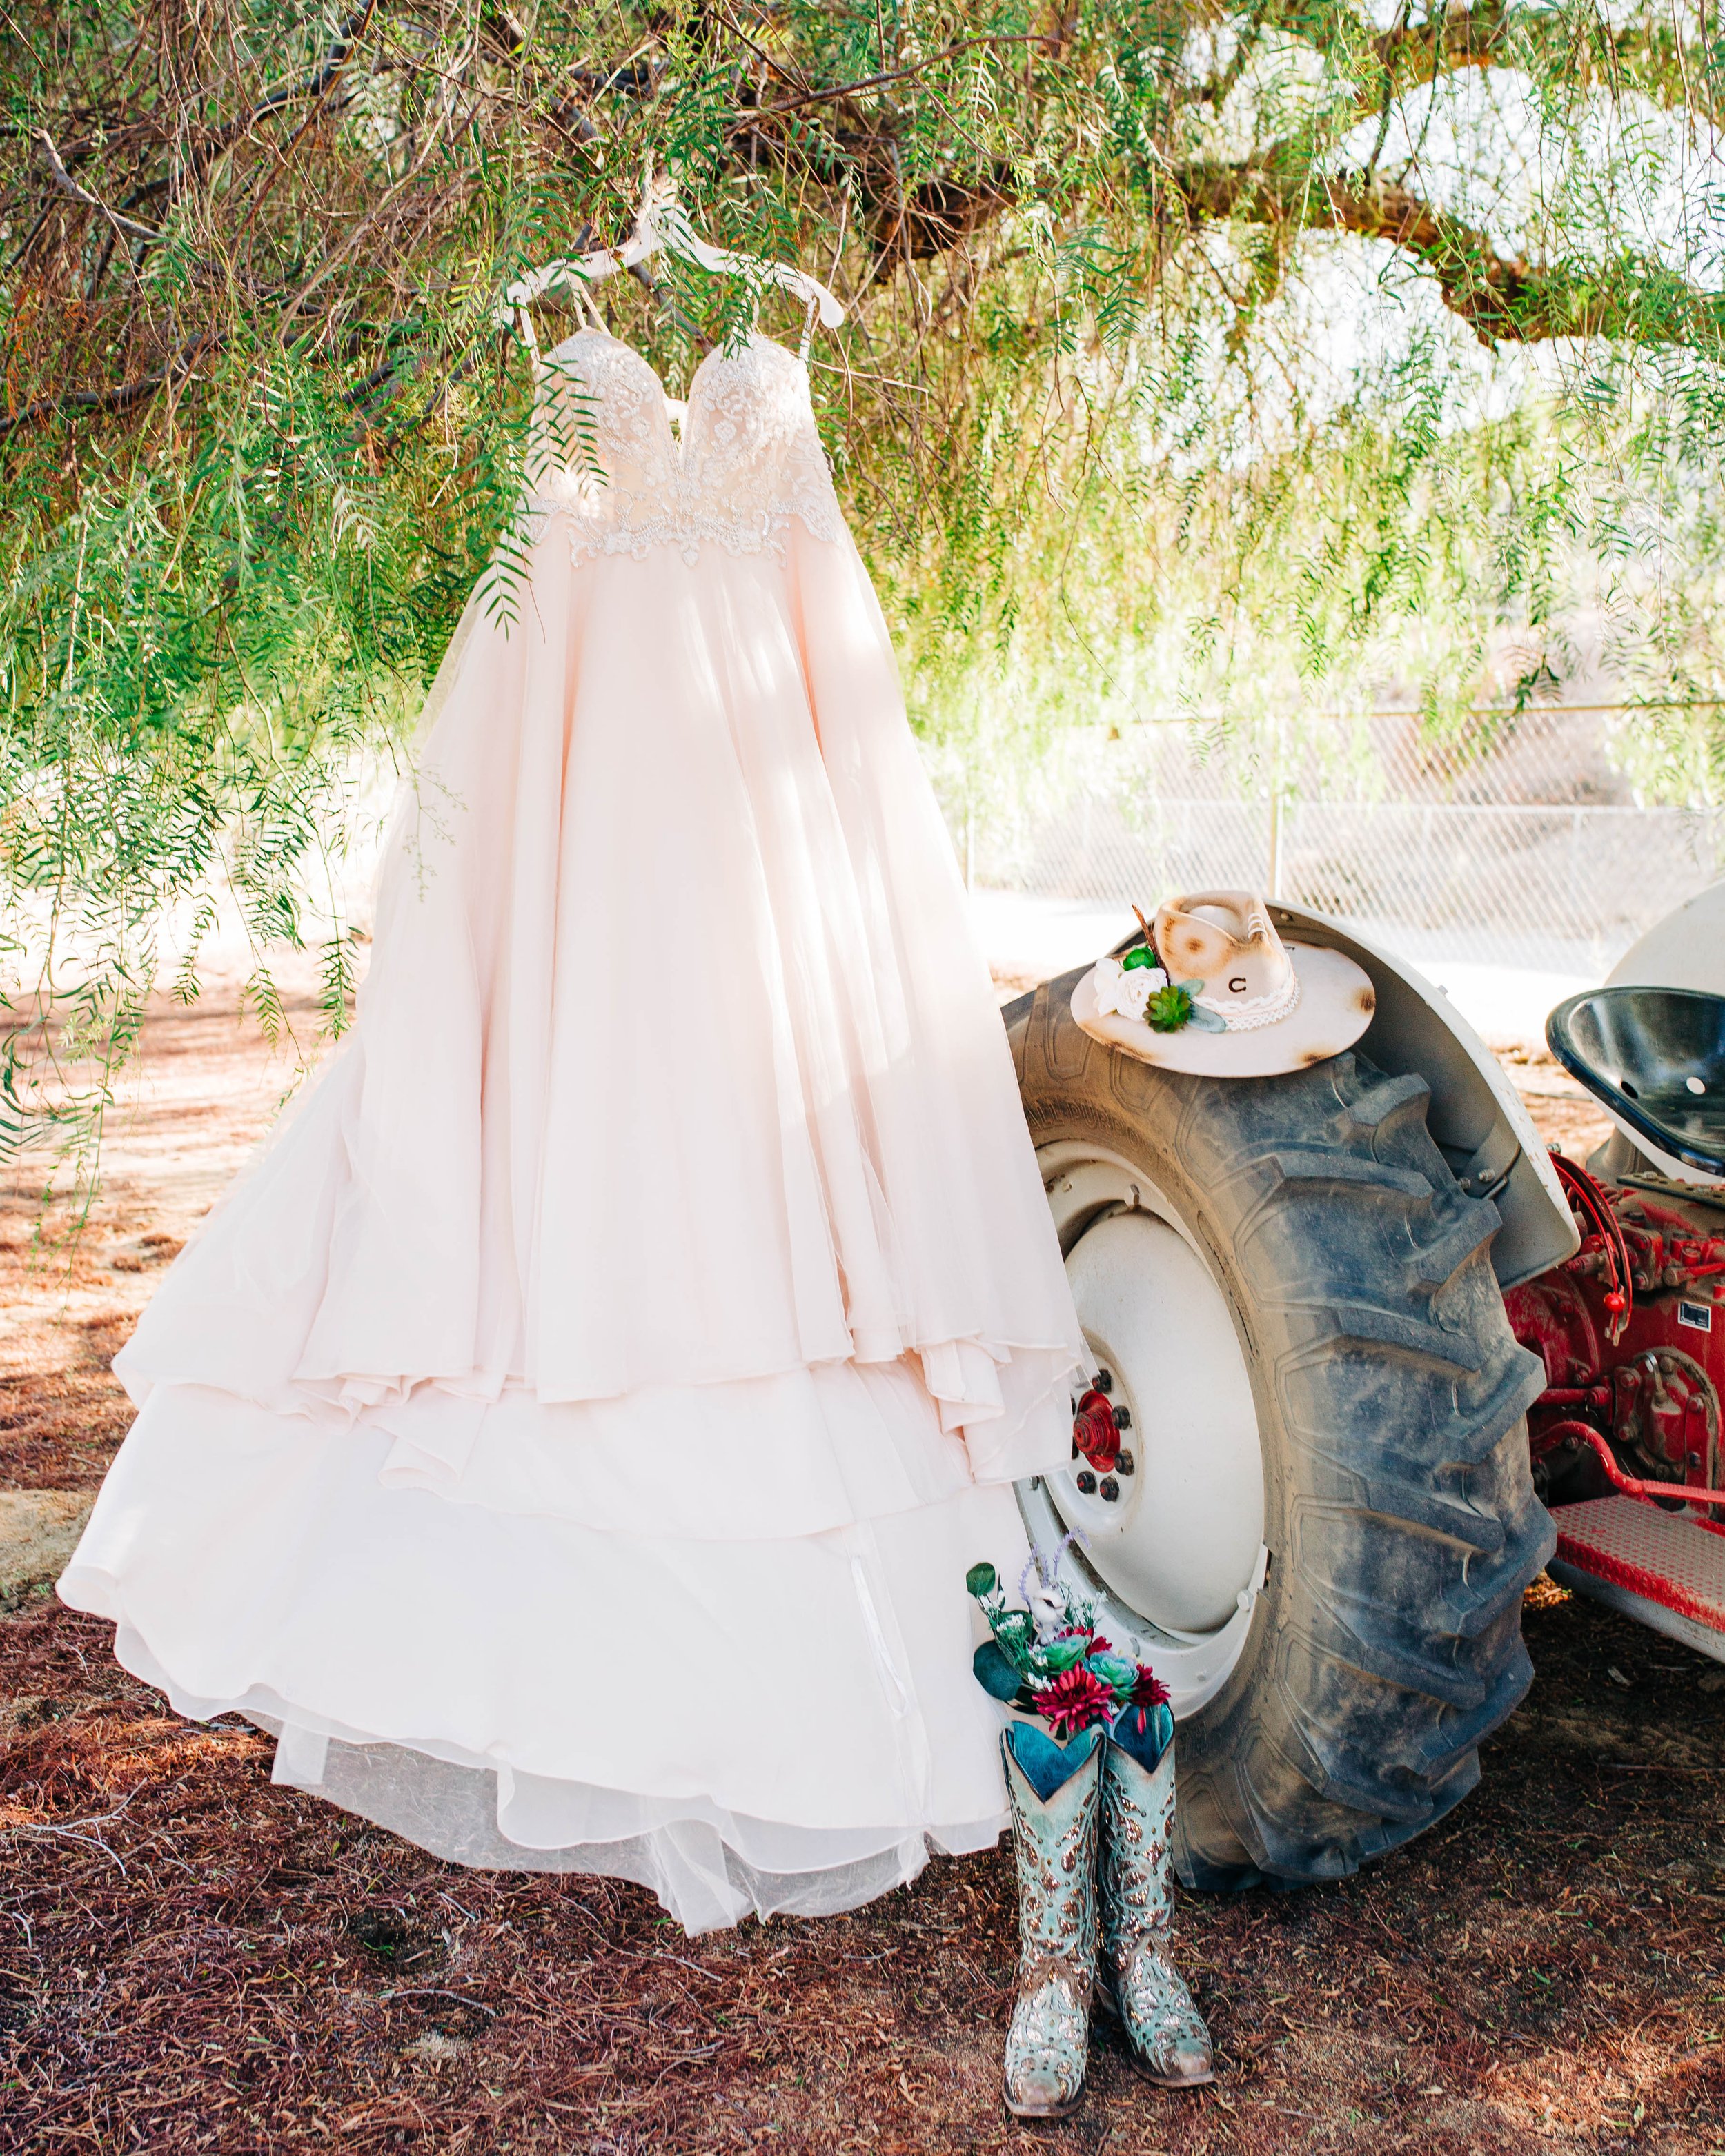 wedding dress and wedding boots on a tractor.jpg